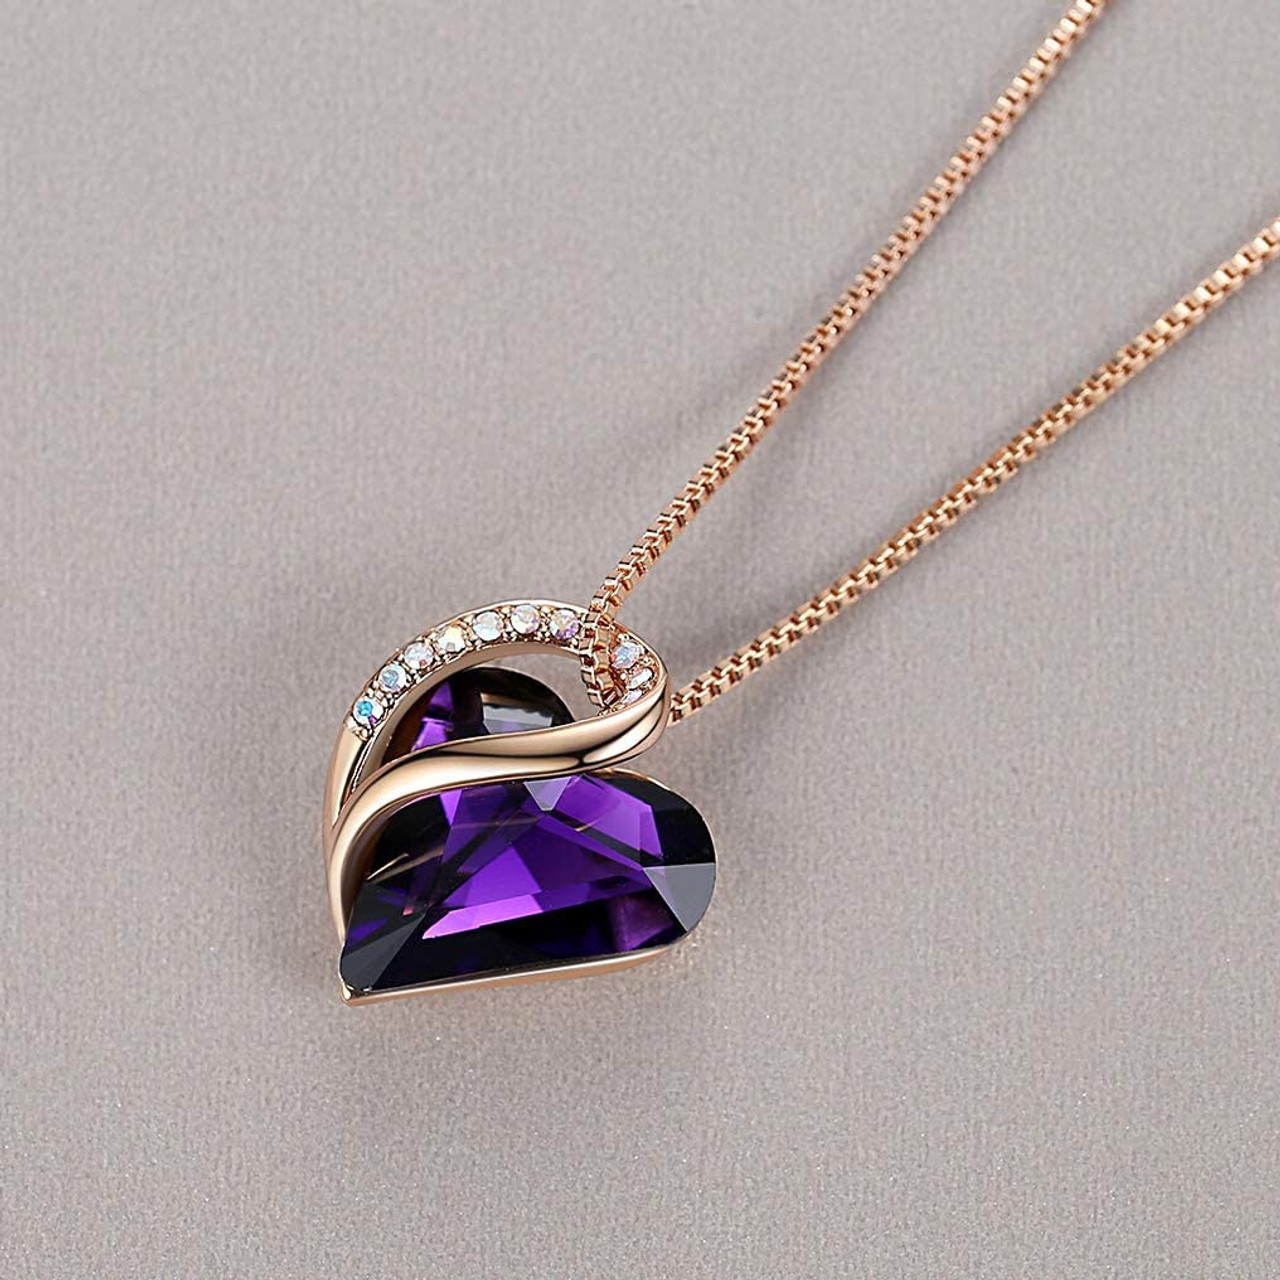 Dark Purple Heart Amethyst Crystal (Rose Gold) Pendant with 18" Chain Necklace -  Gift for Her - Heart Pendant for Women. Color: February Birthstone Crystal